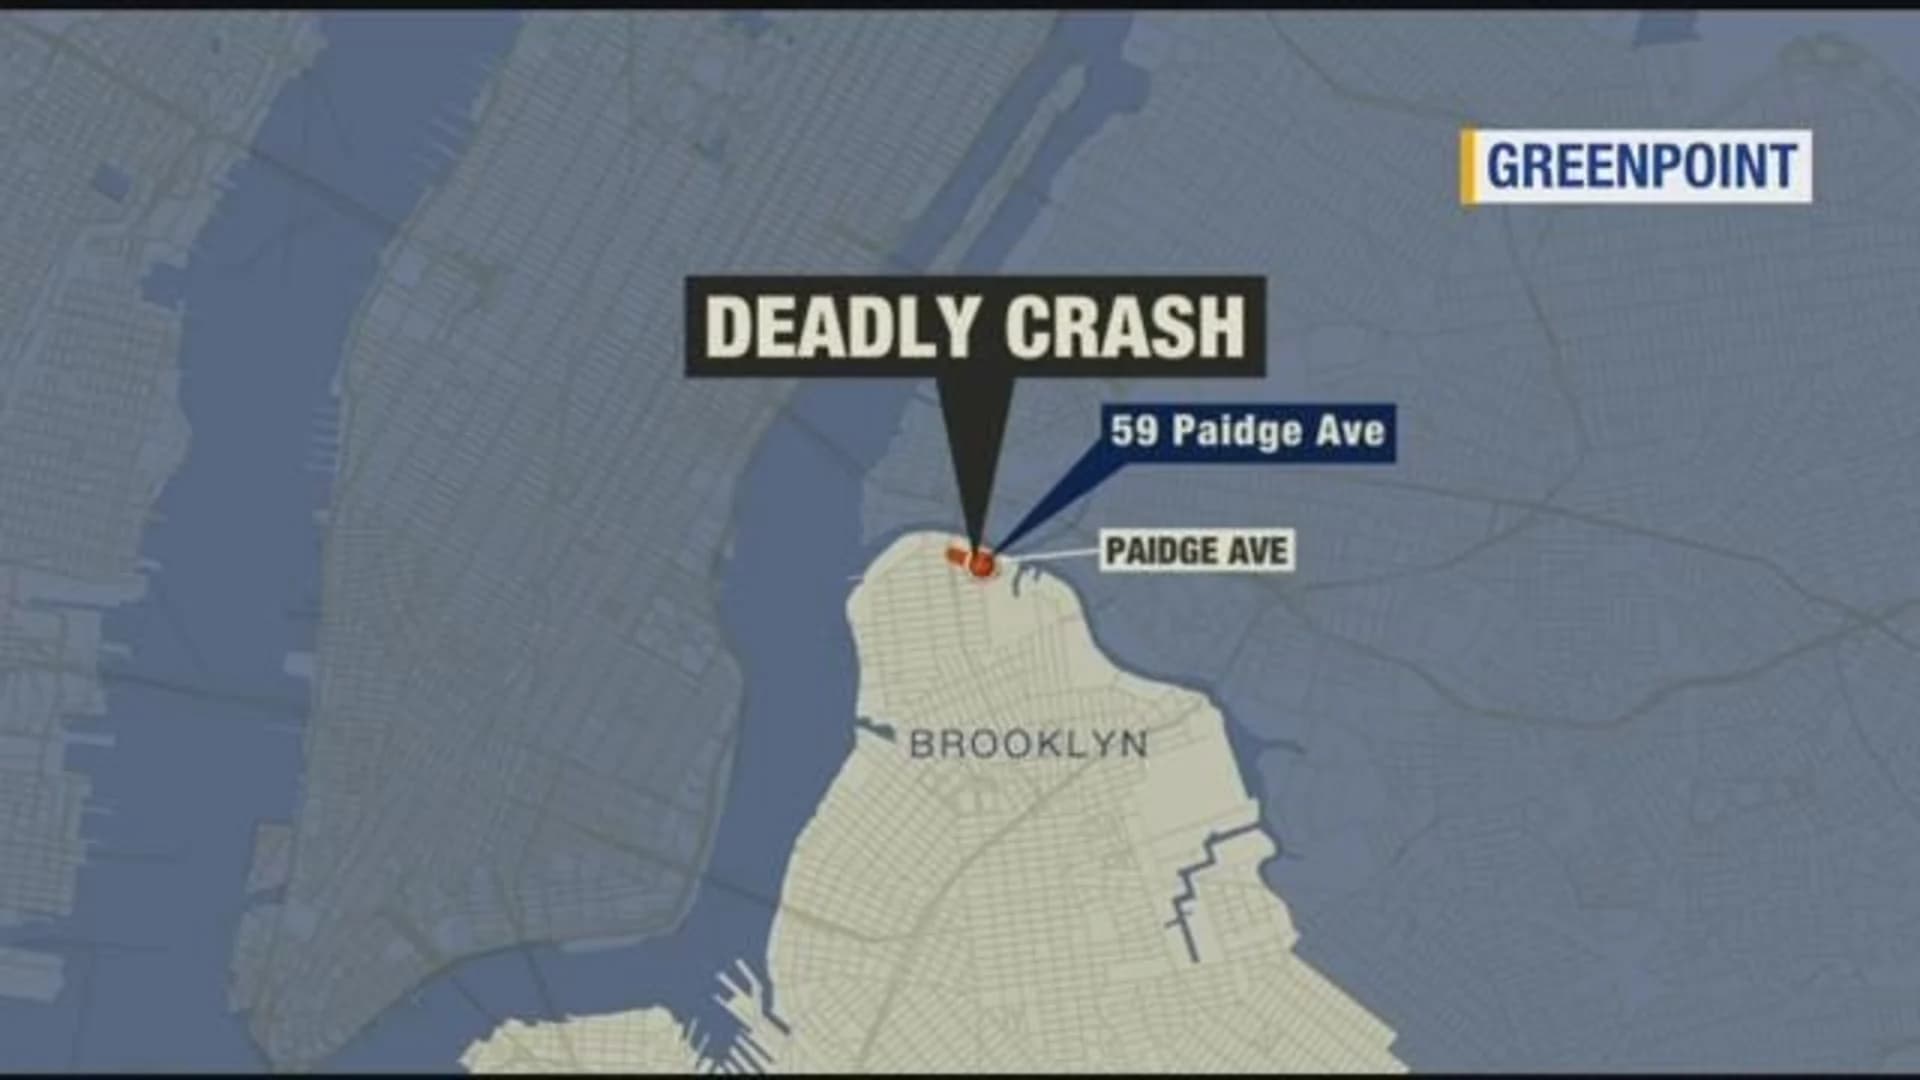 Police: 72-year-old man fatally struck in Greenpoint identified